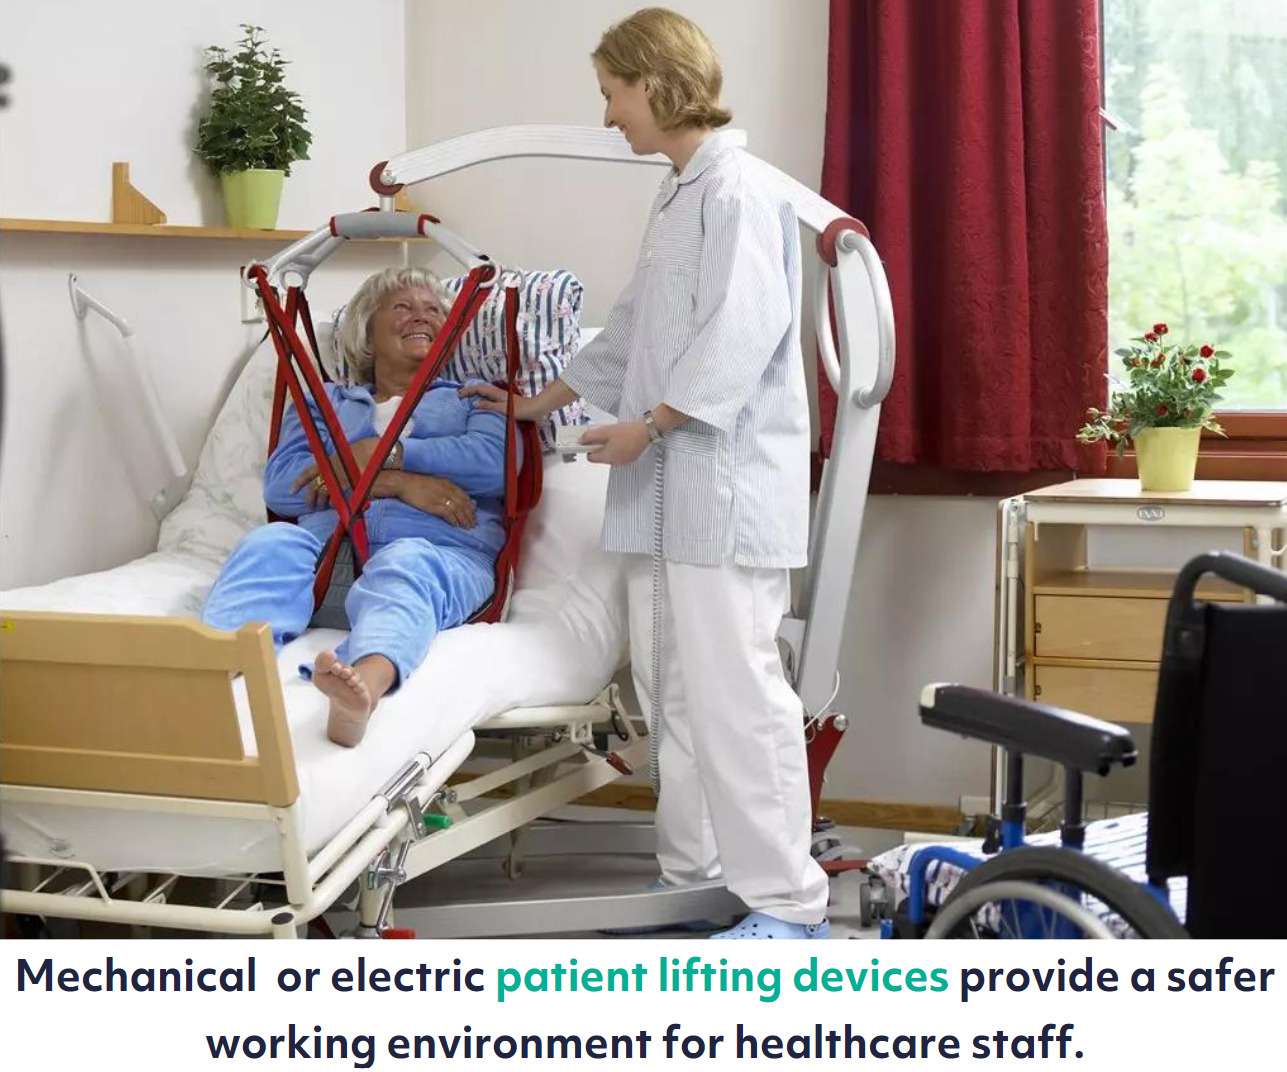 Nurse lifting an elderly female patient using a electric hoist. They are indoors and a wheelchair is in the foreground.